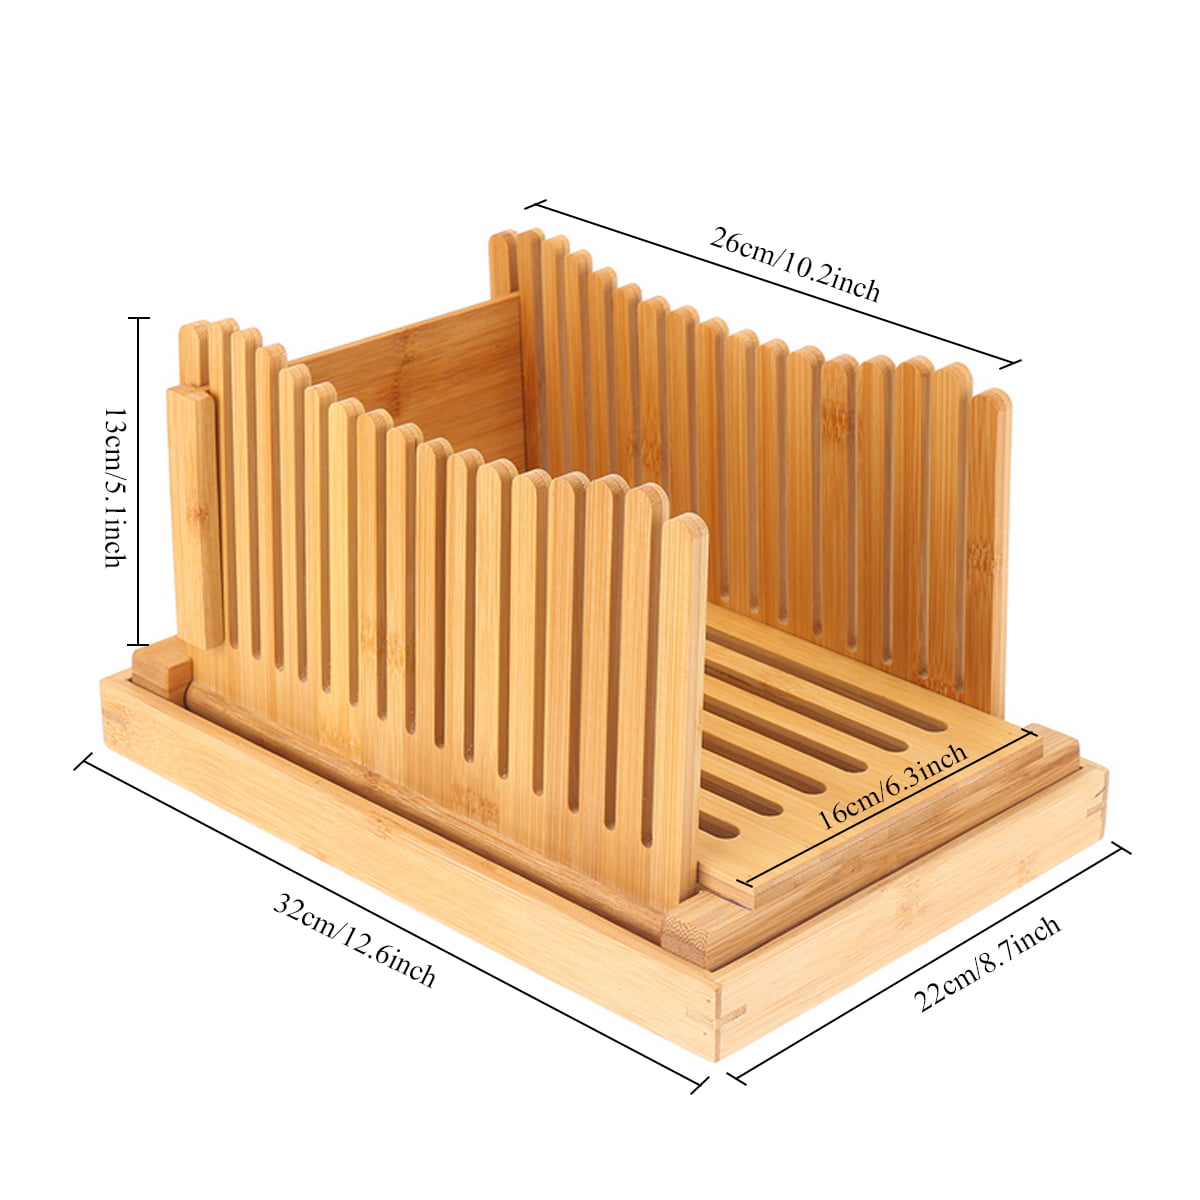 A Home Bamboo Bread Slicer For Homemade Bread Loaf – Wooden Bread